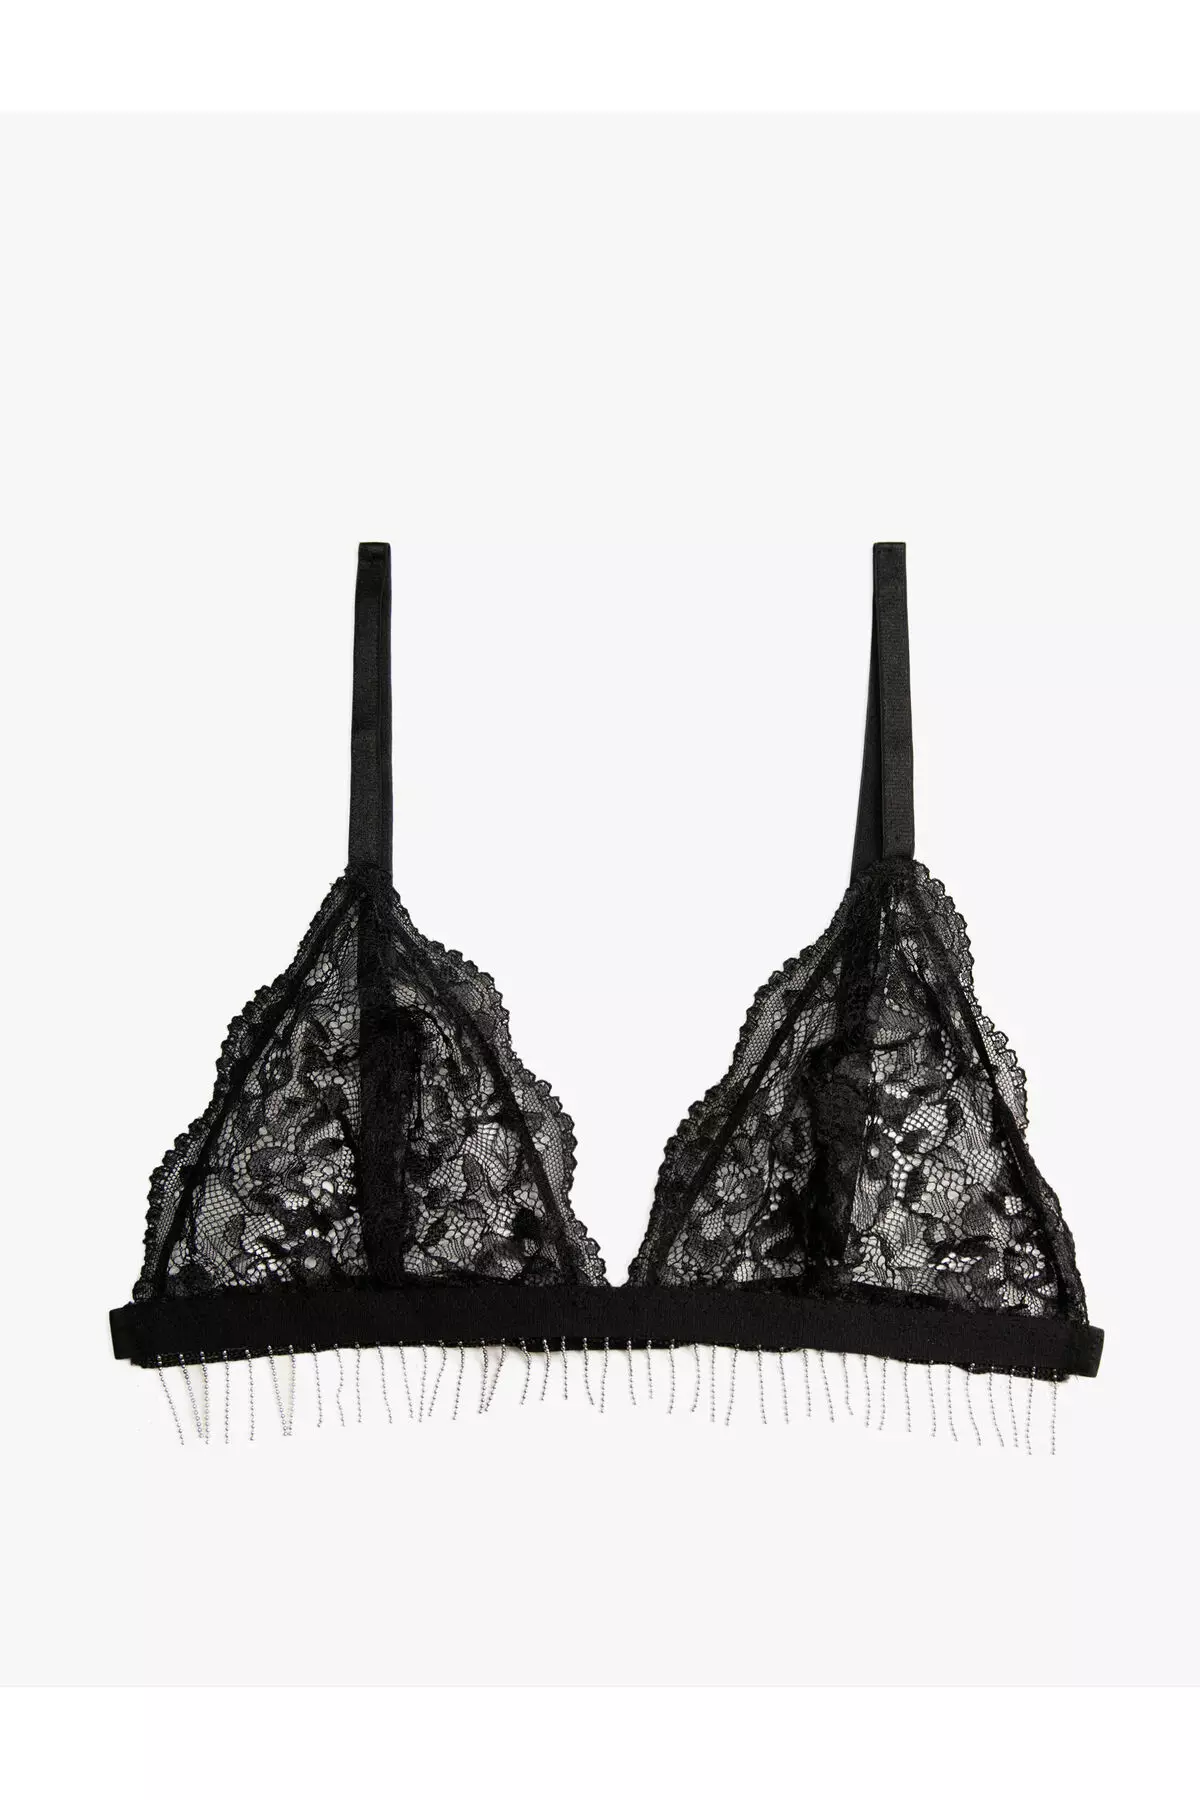 Lace Trim Black Non Padded Bralette By Estonished, EST-NG-142